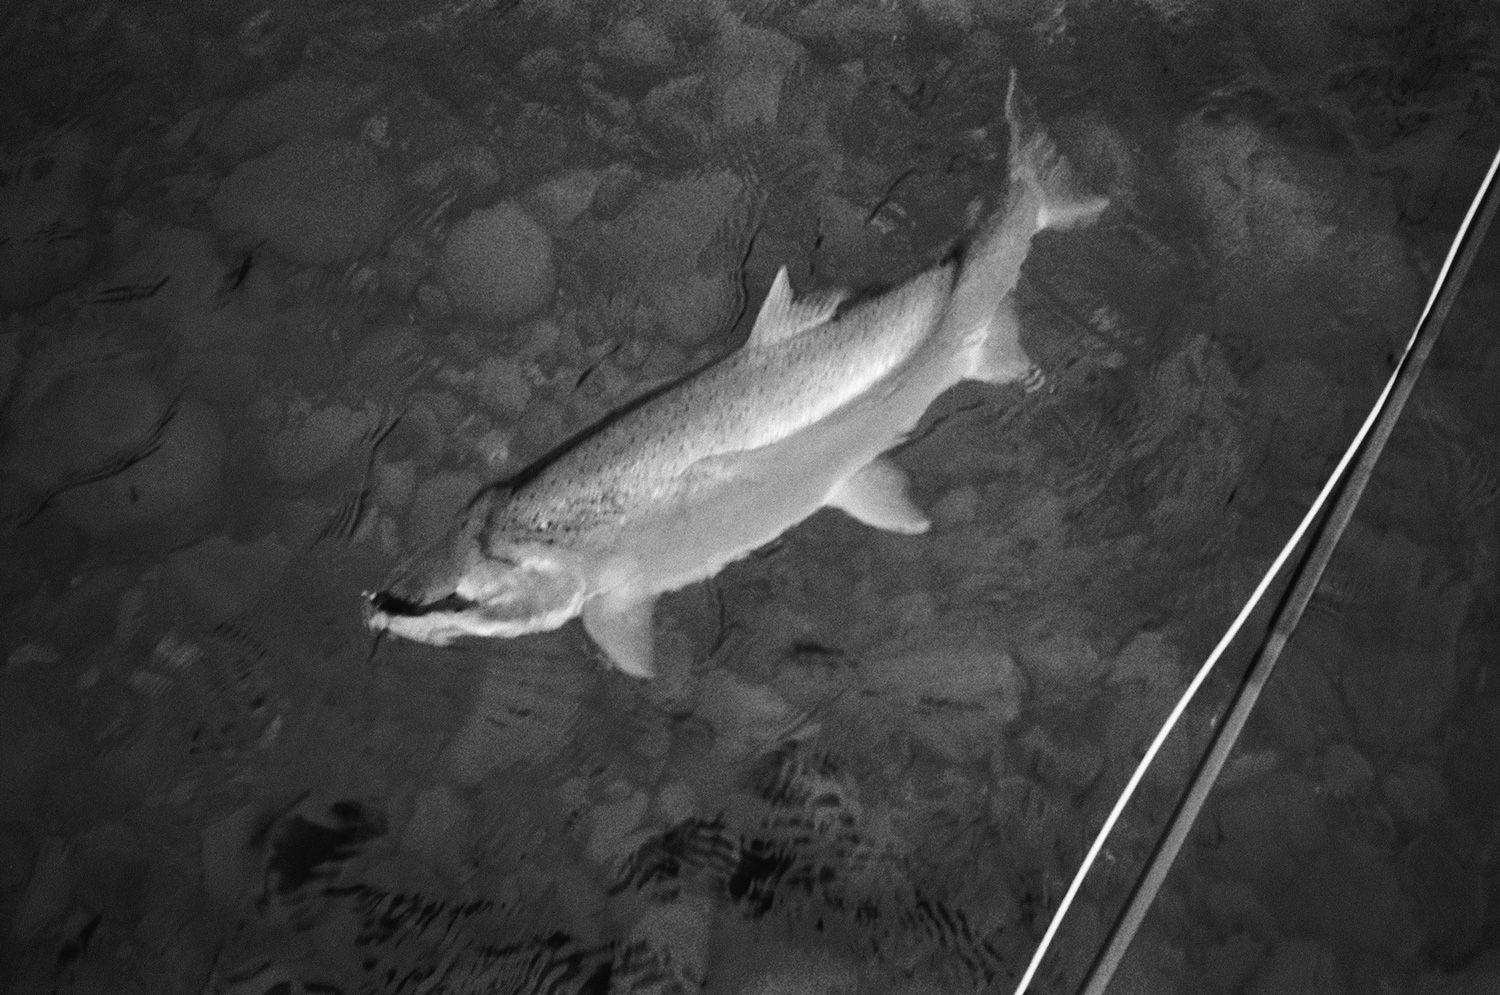 The best camera is the one you have with you. In this case it was a bright yellow waterproof point-and-shoot Minolta, scored on Craigslist. It’s small enough to keep in a wader pocket, and dummy-proof due to being a point-and-shoot. What’s not dummy-proof are steelhead anglers, fishing the same run over and over and over until, somehow, a fish happens to be there, crushes your fly and makes it all worthwhile. Photo: Copi Vojta